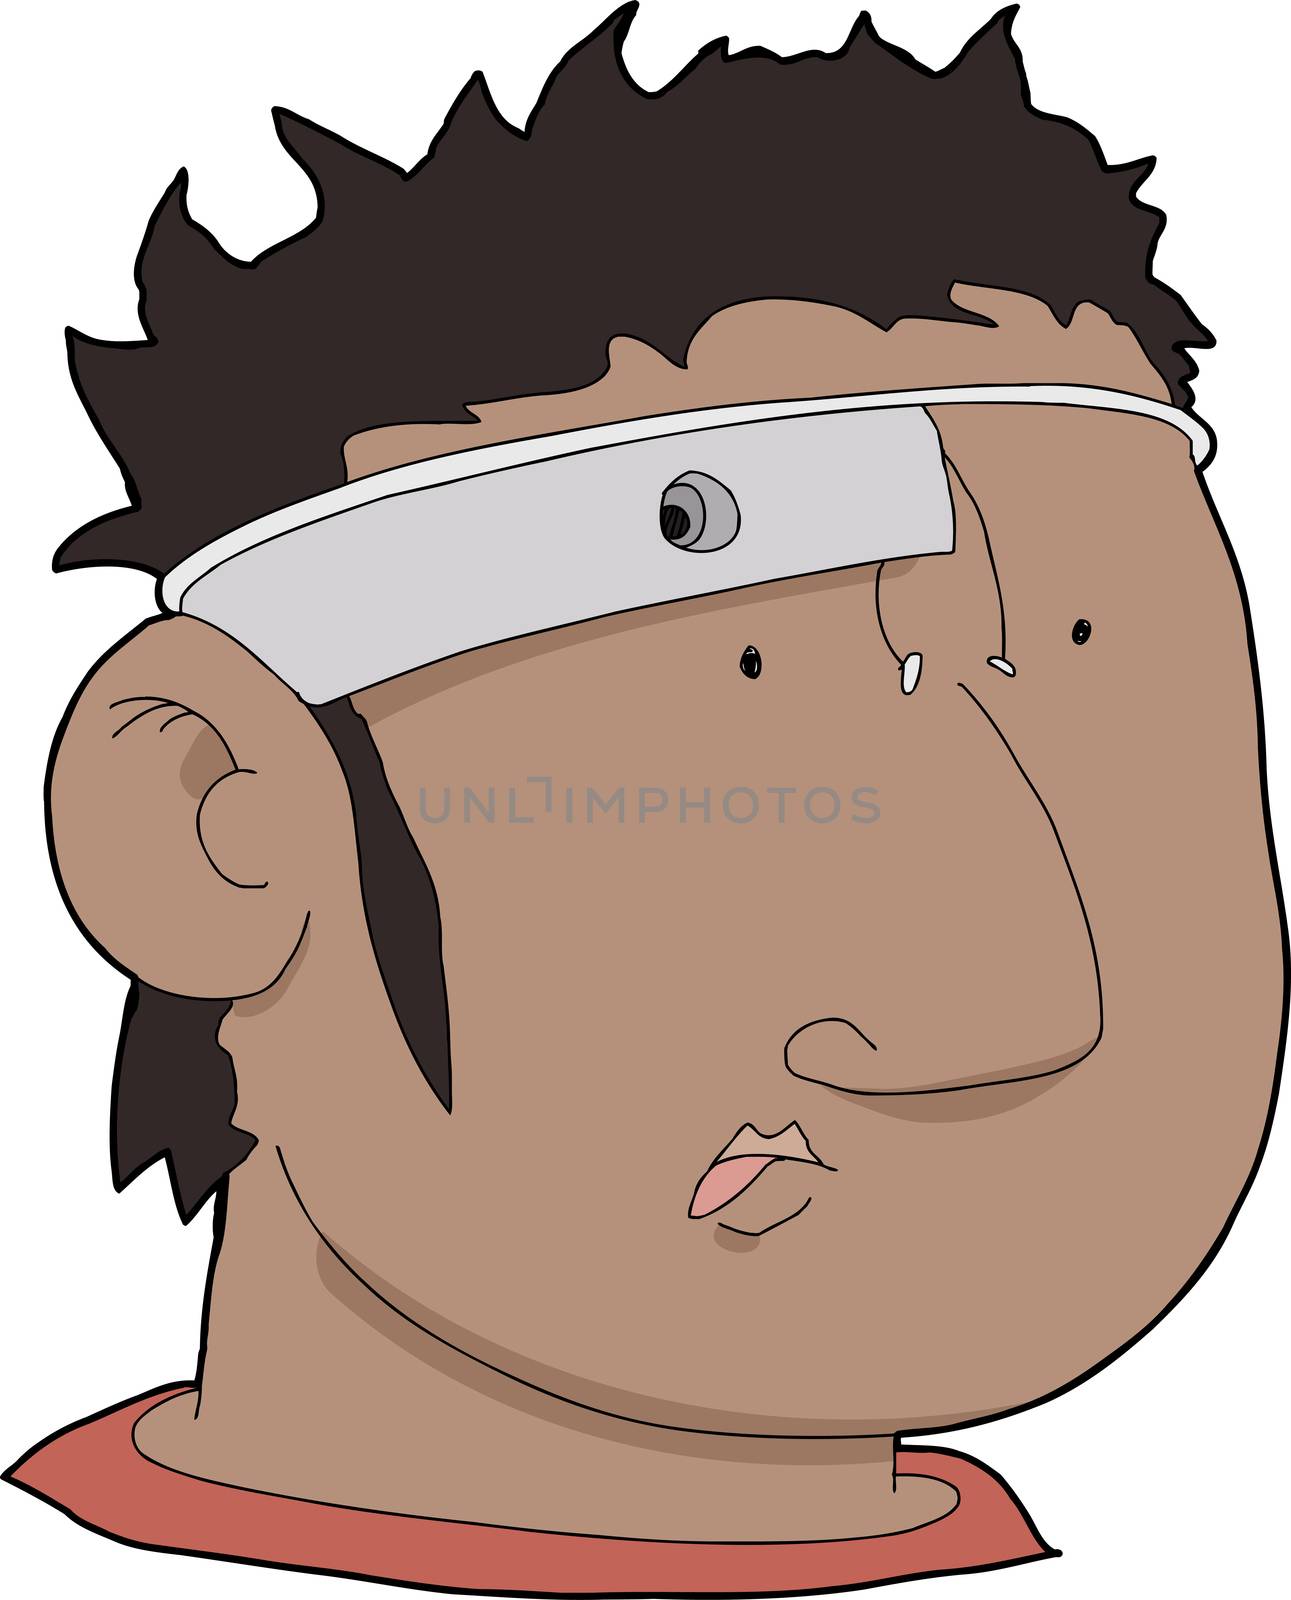 Man with Wearable Technology by TheBlackRhino